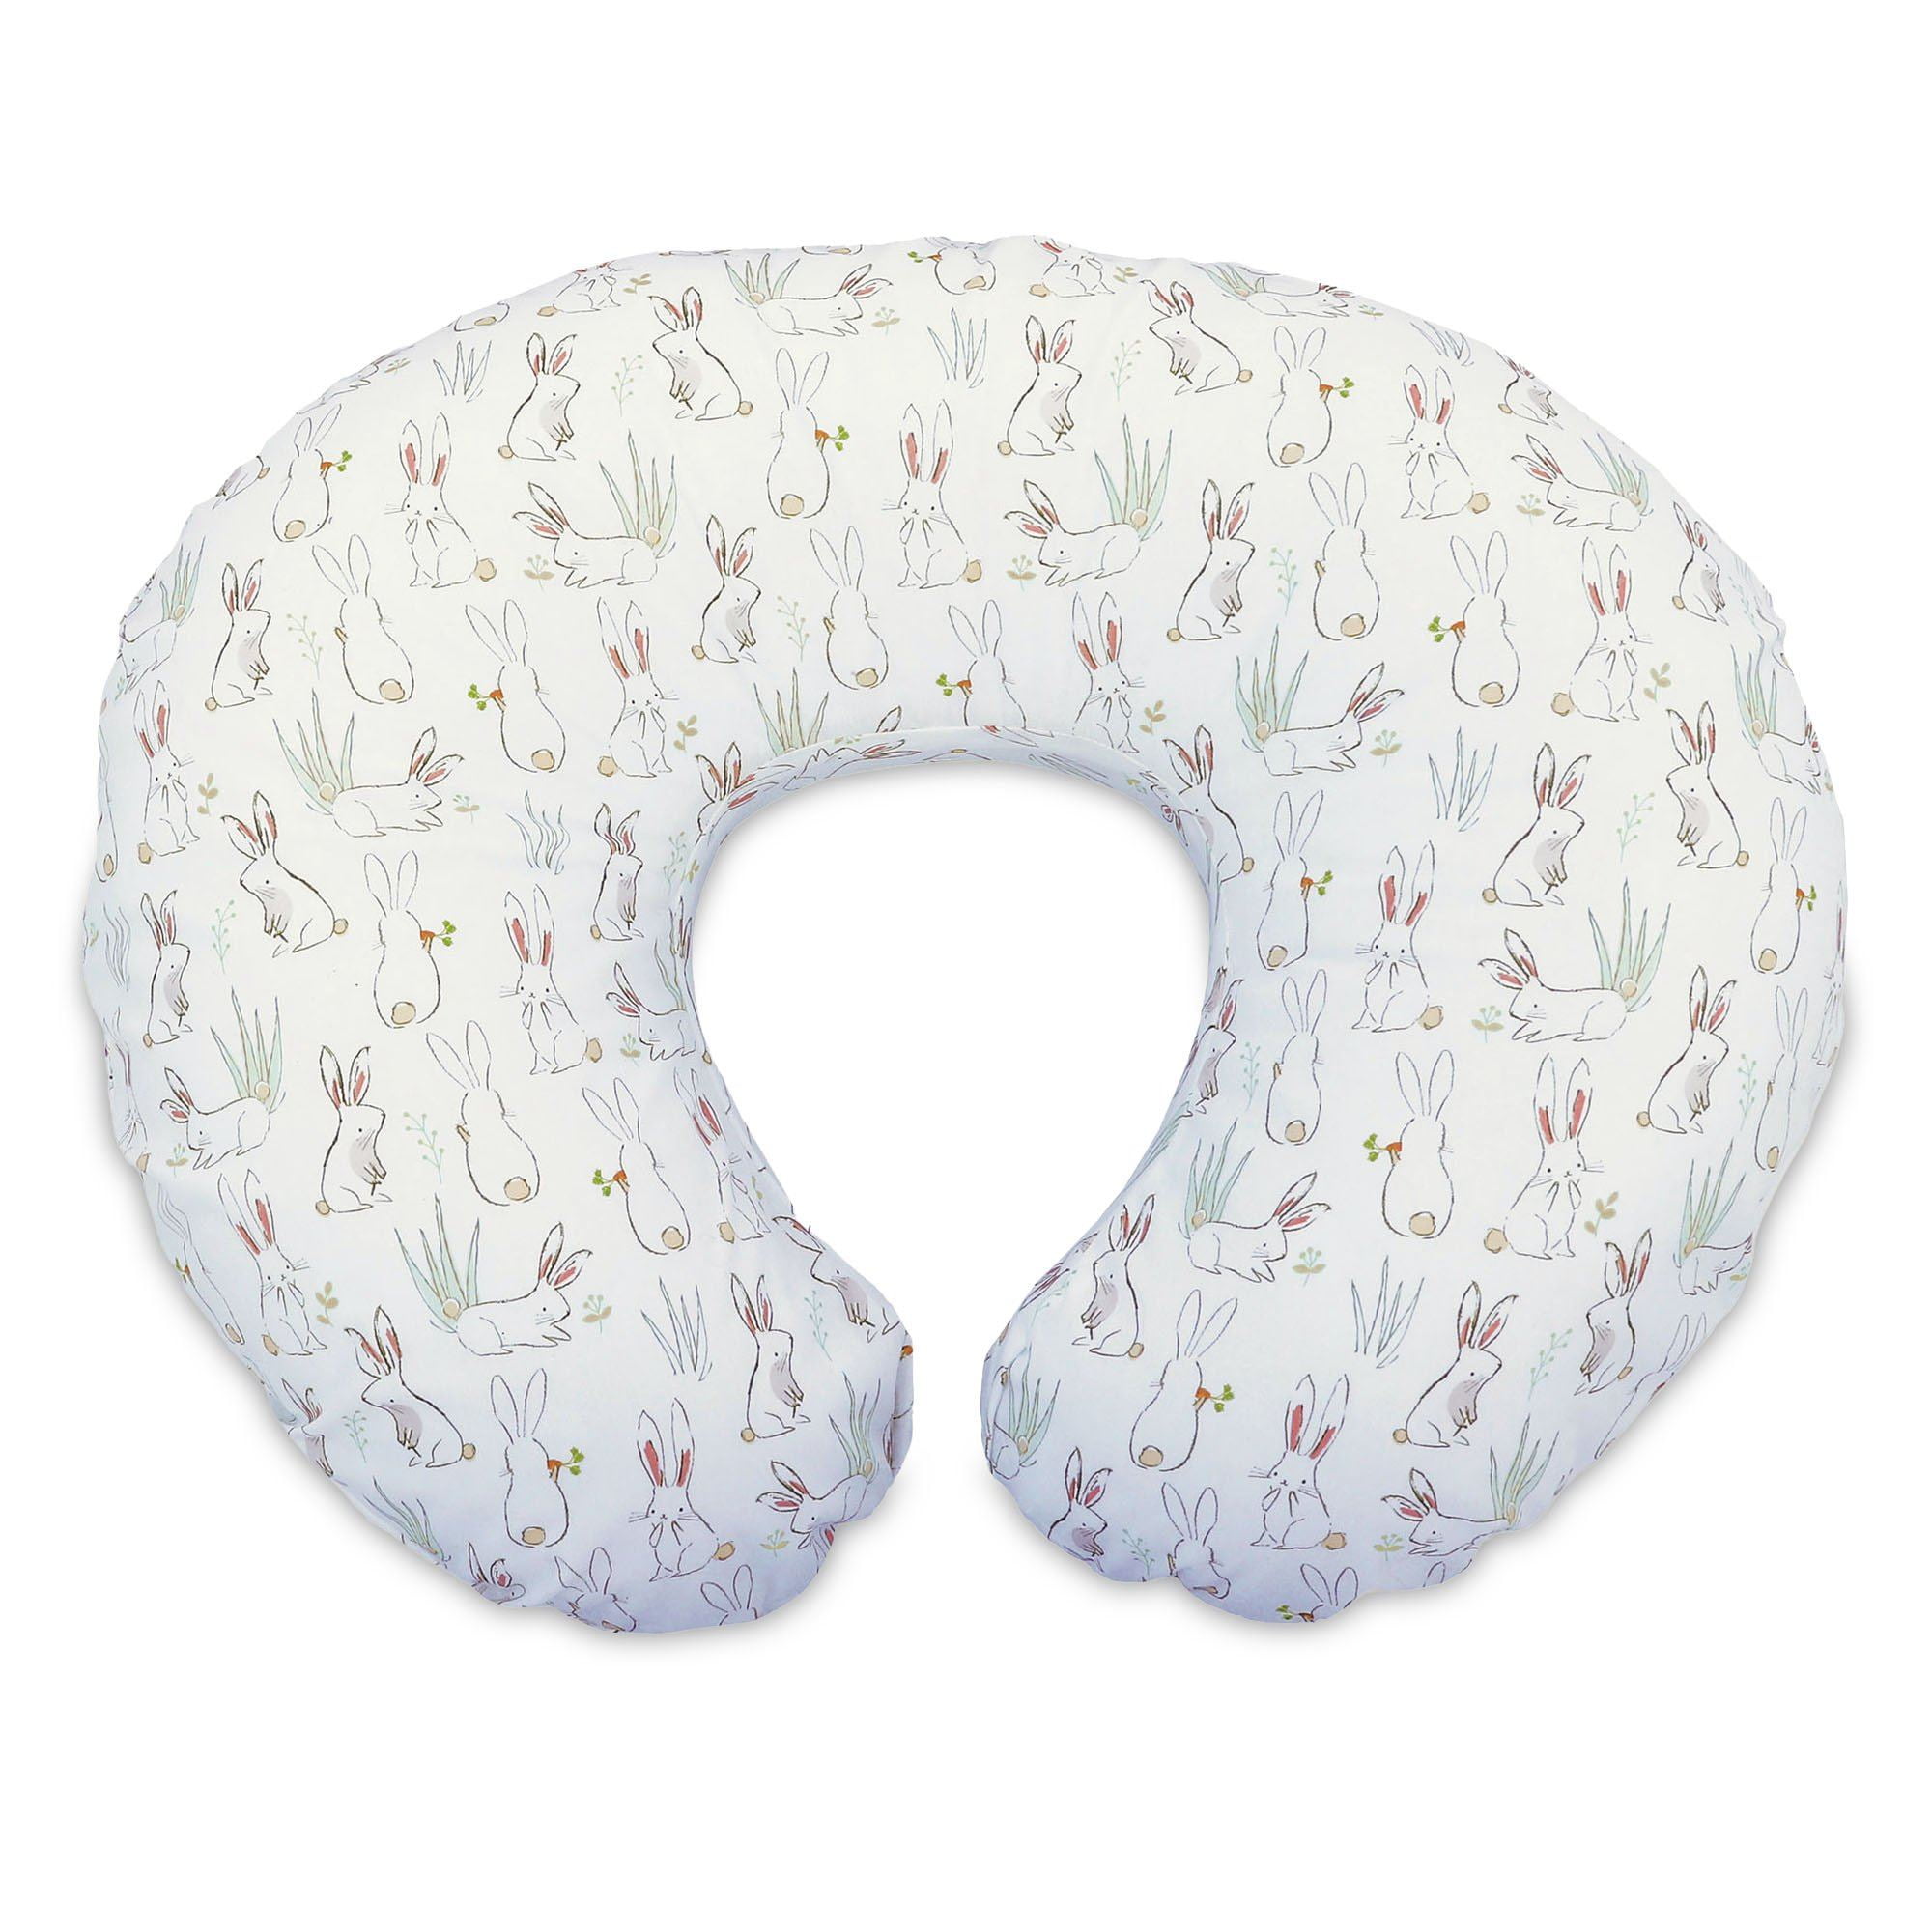 Boppy Original Nursing Pillow Cover Cotton Blend Fabric with Allover Fashion Multicolor Spice Woodland Animals